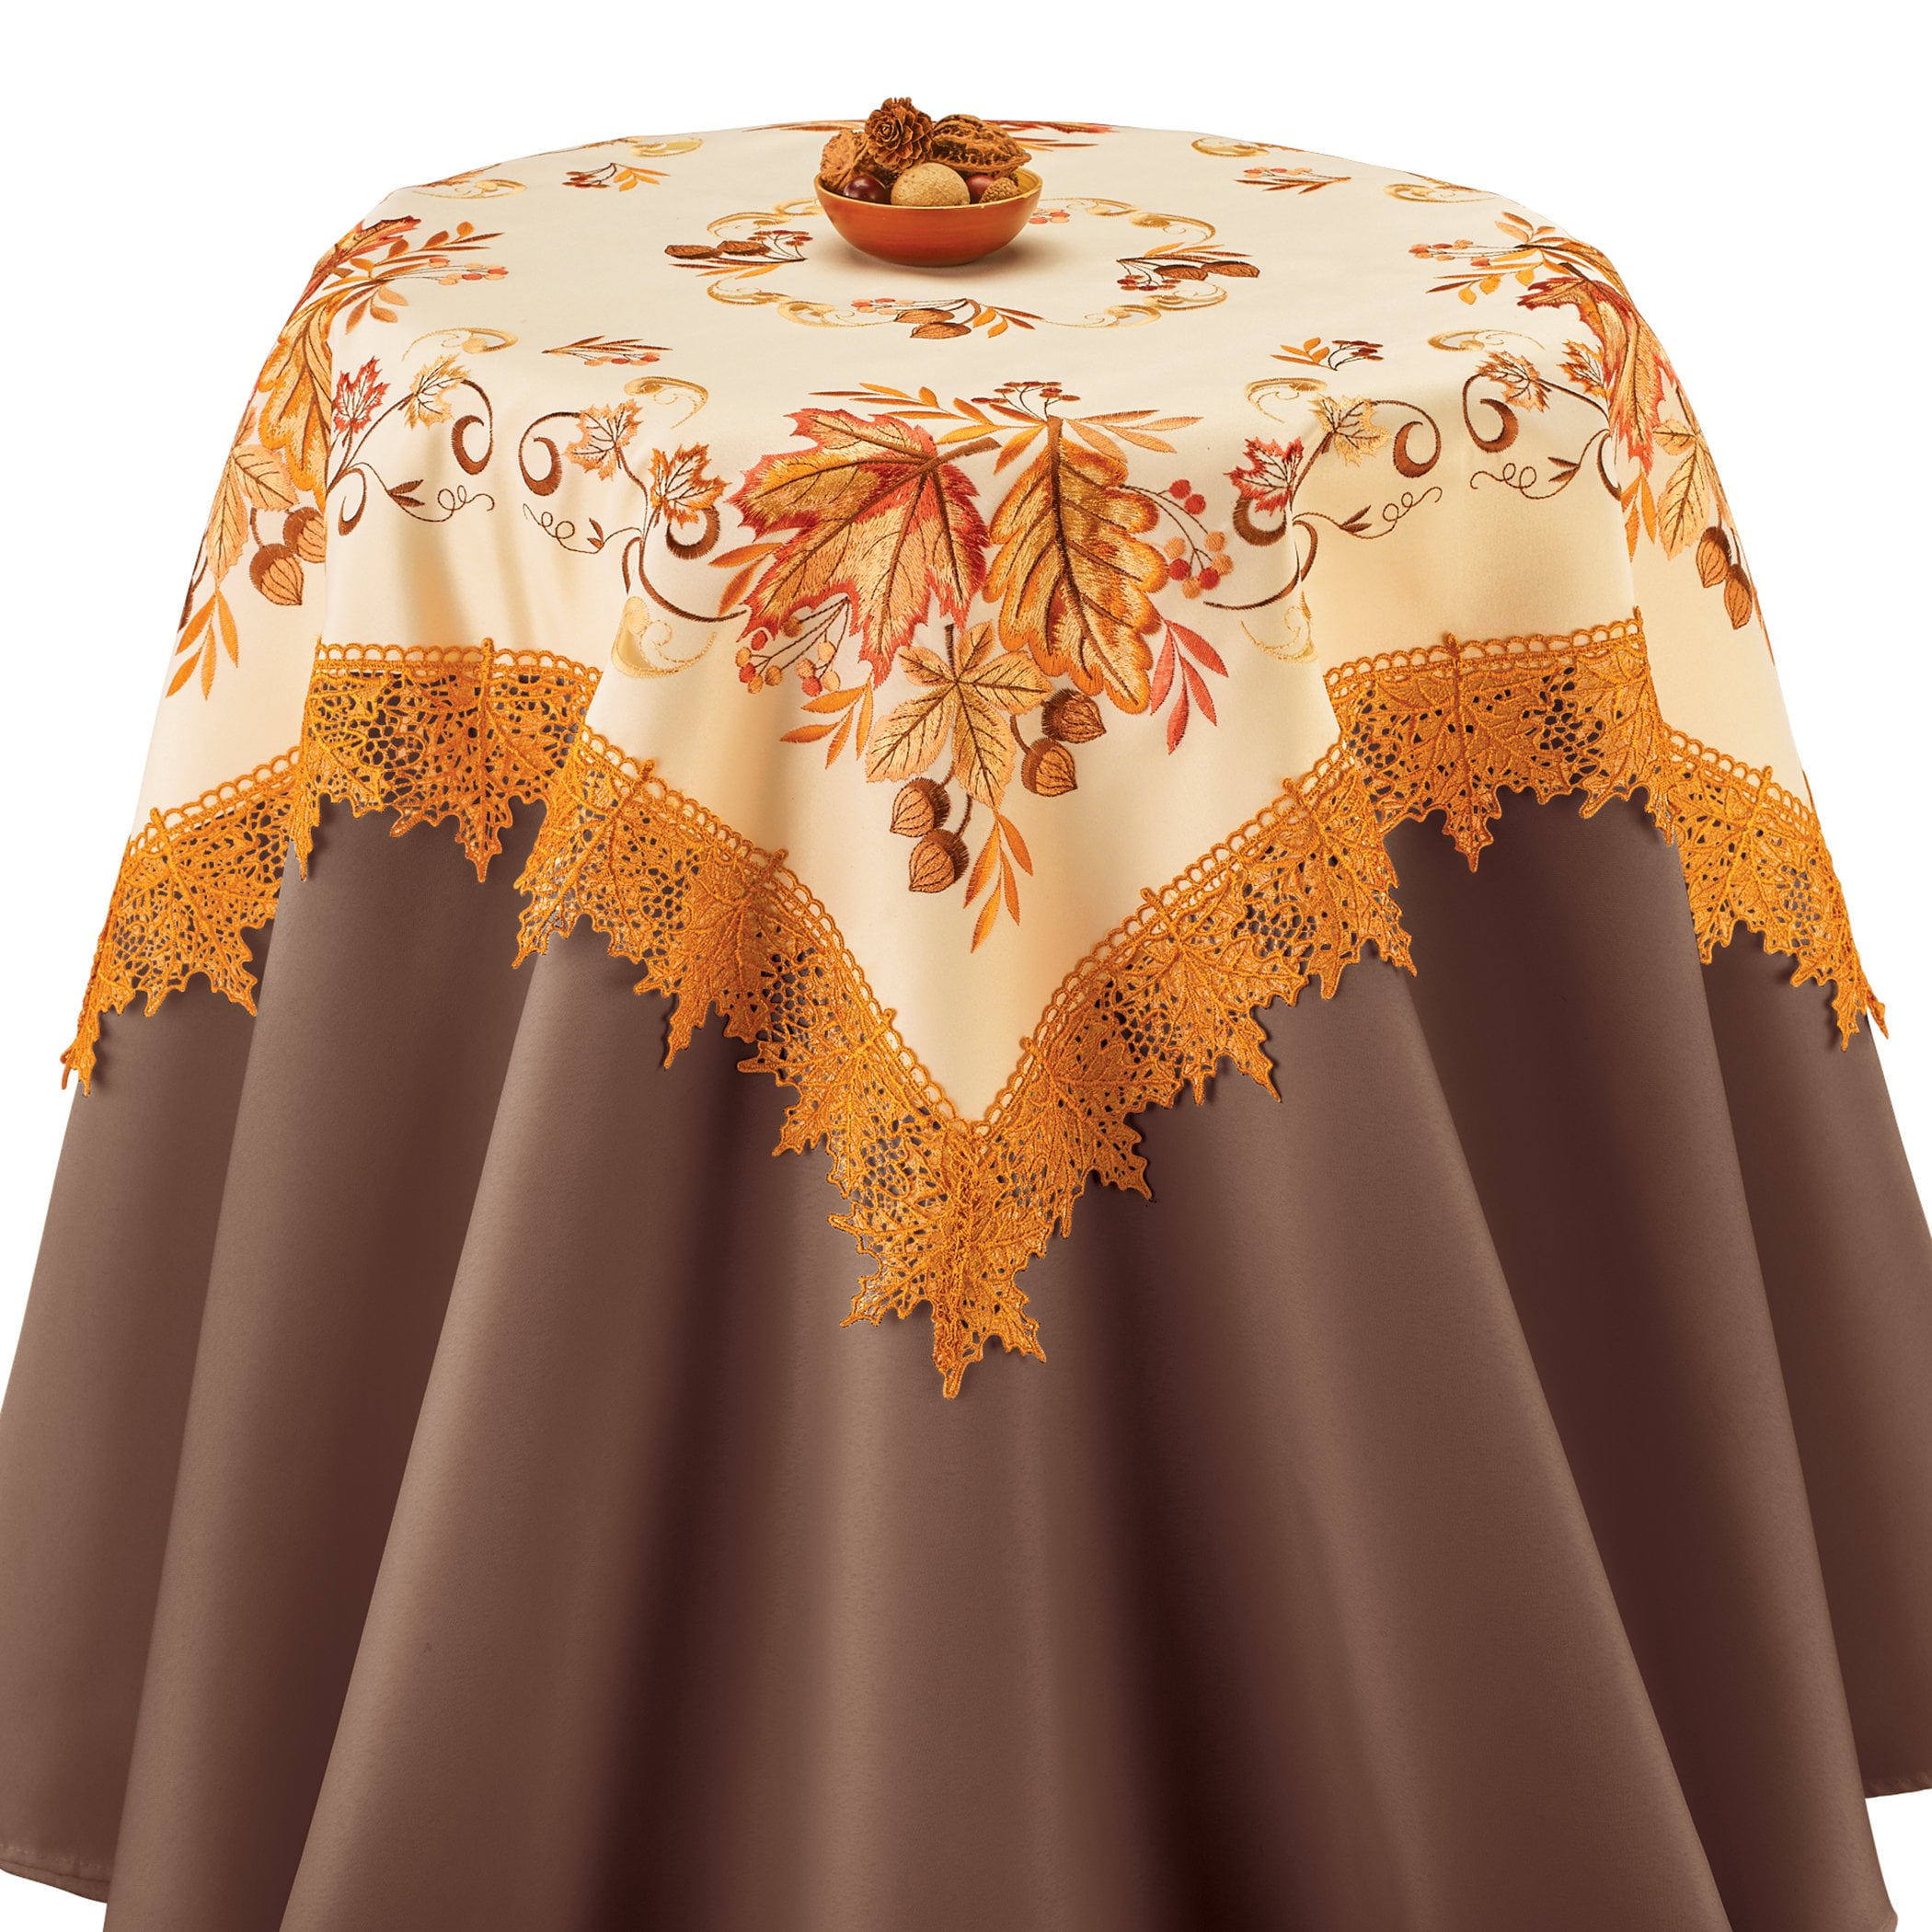 The Big One Fall autumn Leaves acorn Thanksgiving 60 x 84 Oblong Tablecloth new 